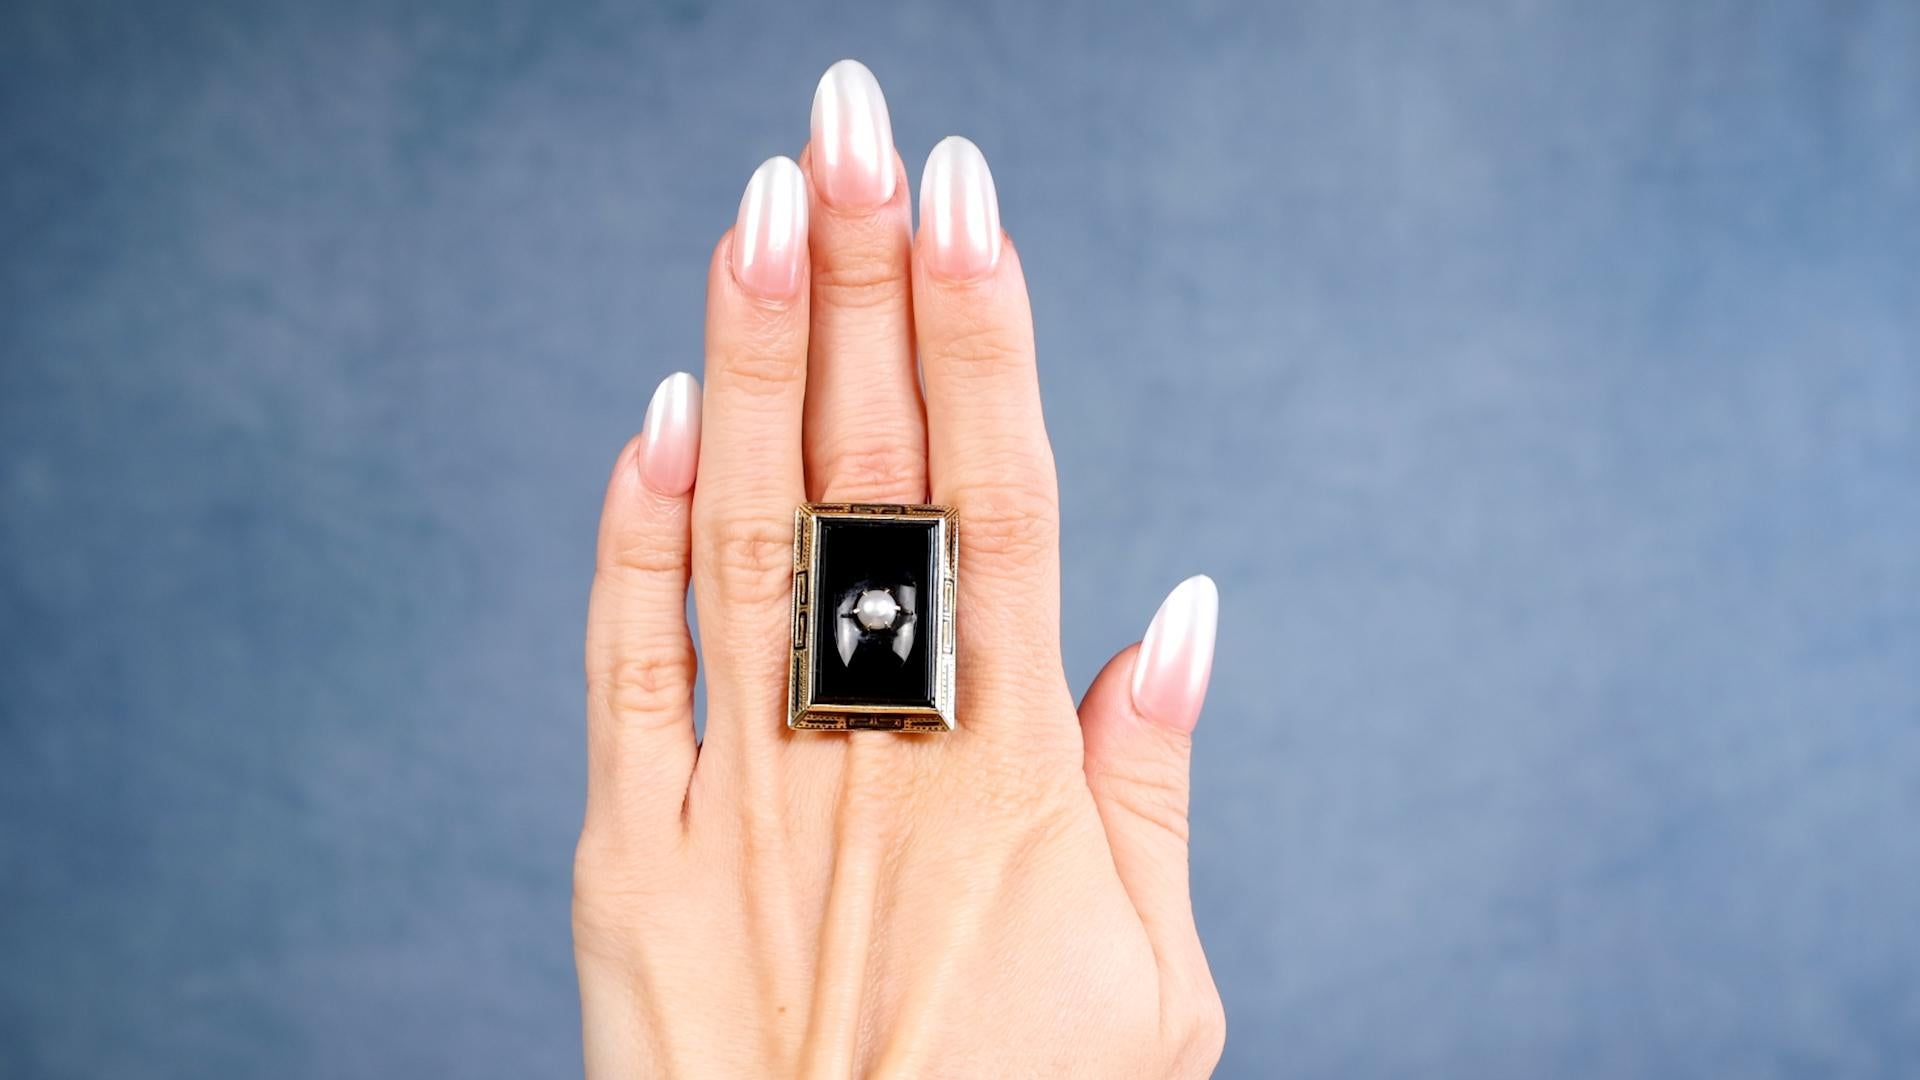 One Art Deco Onyx Pearl 14k Yellow Gold Ring. Featuring one piece of polished onyx and one white pearl measuring 5.10 millimeters. Crafted in 14 karat yellow gold with purity mark. Circa 1920. The ring is a size 6 ¾ and may be resized.

About this